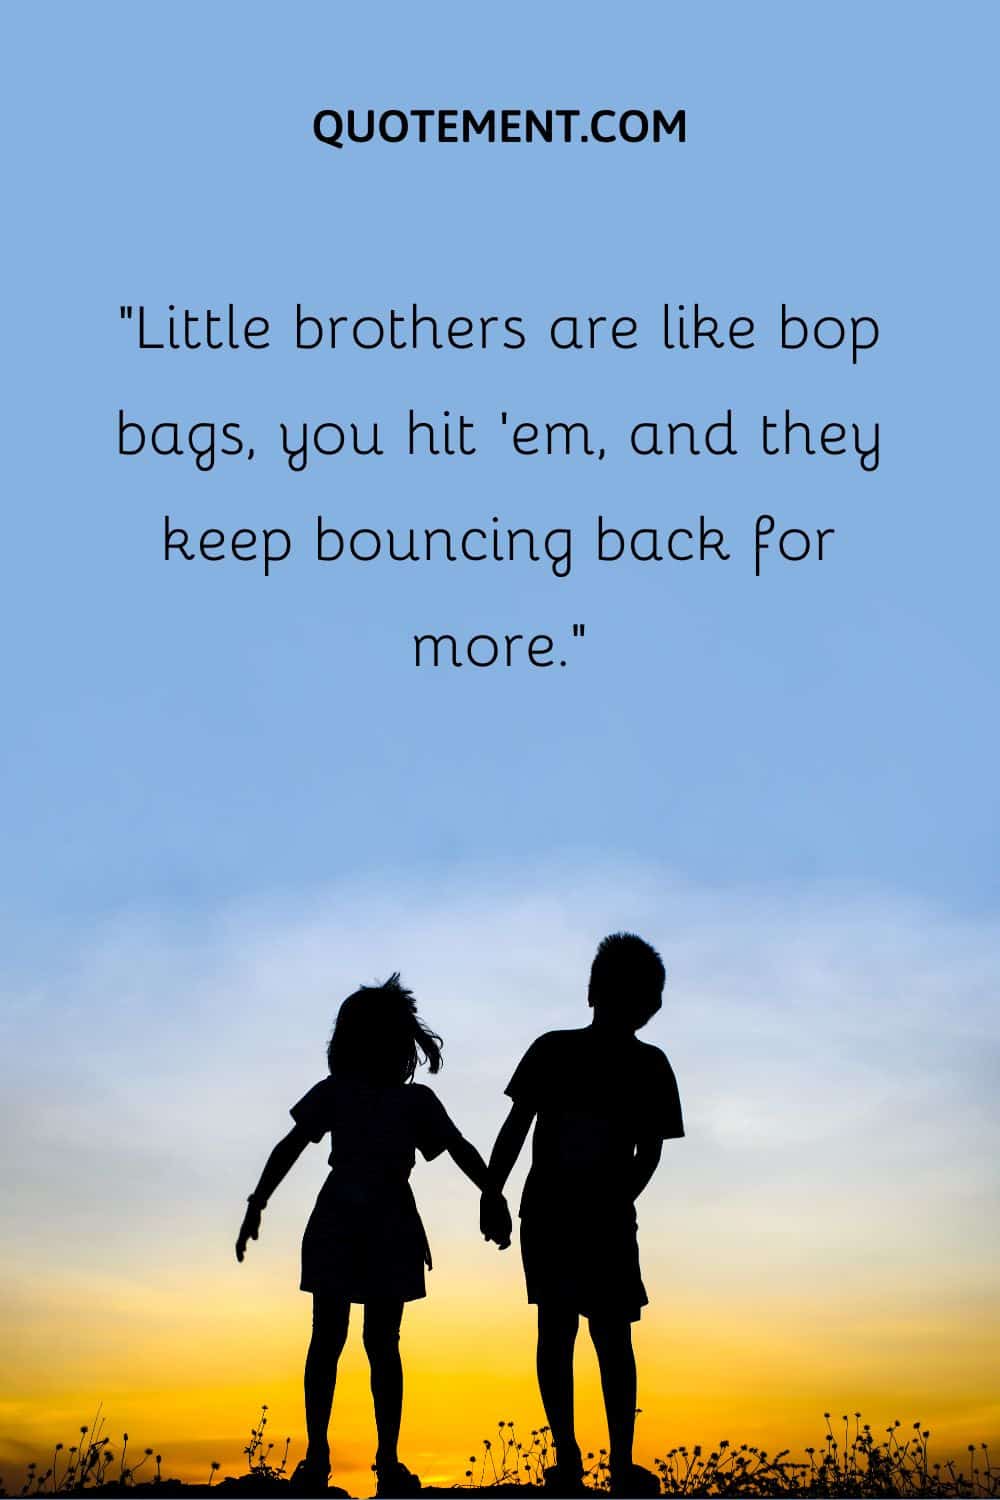 “Little brothers are like bop bags, you hit ’em, and they keep bouncing back for more.”